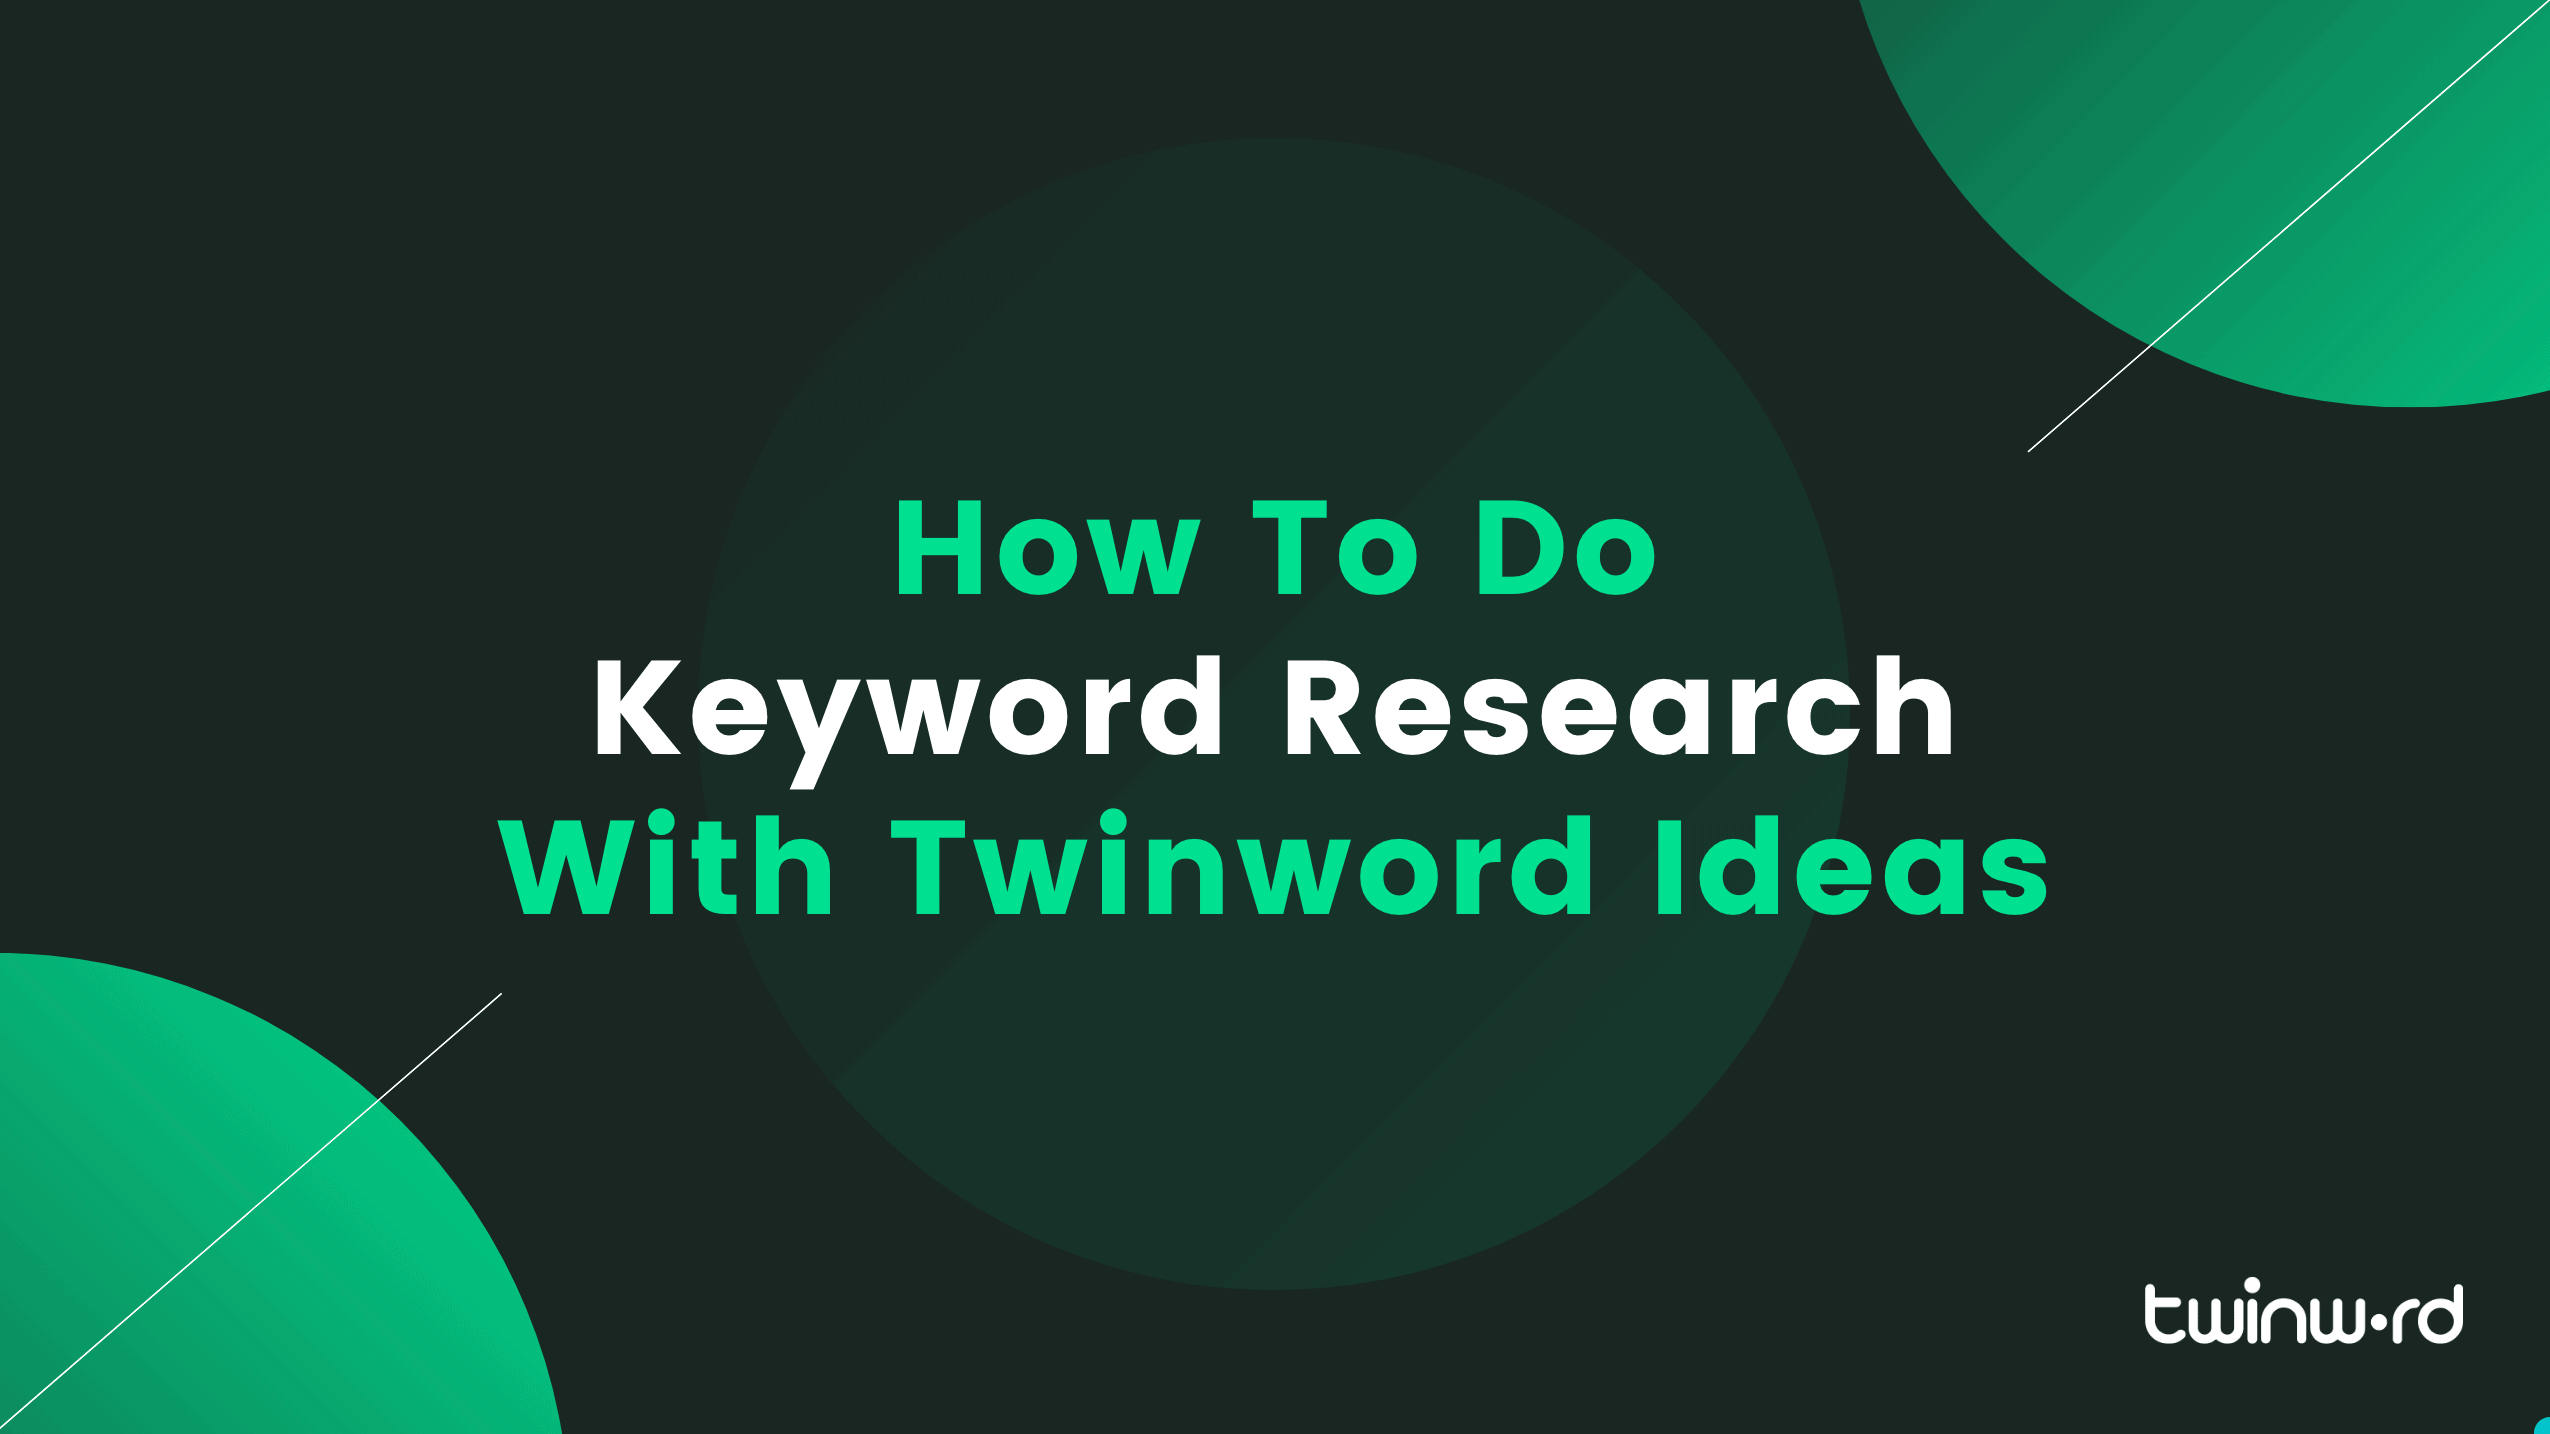 How To Do Keyword Research with Twinword Ideas?